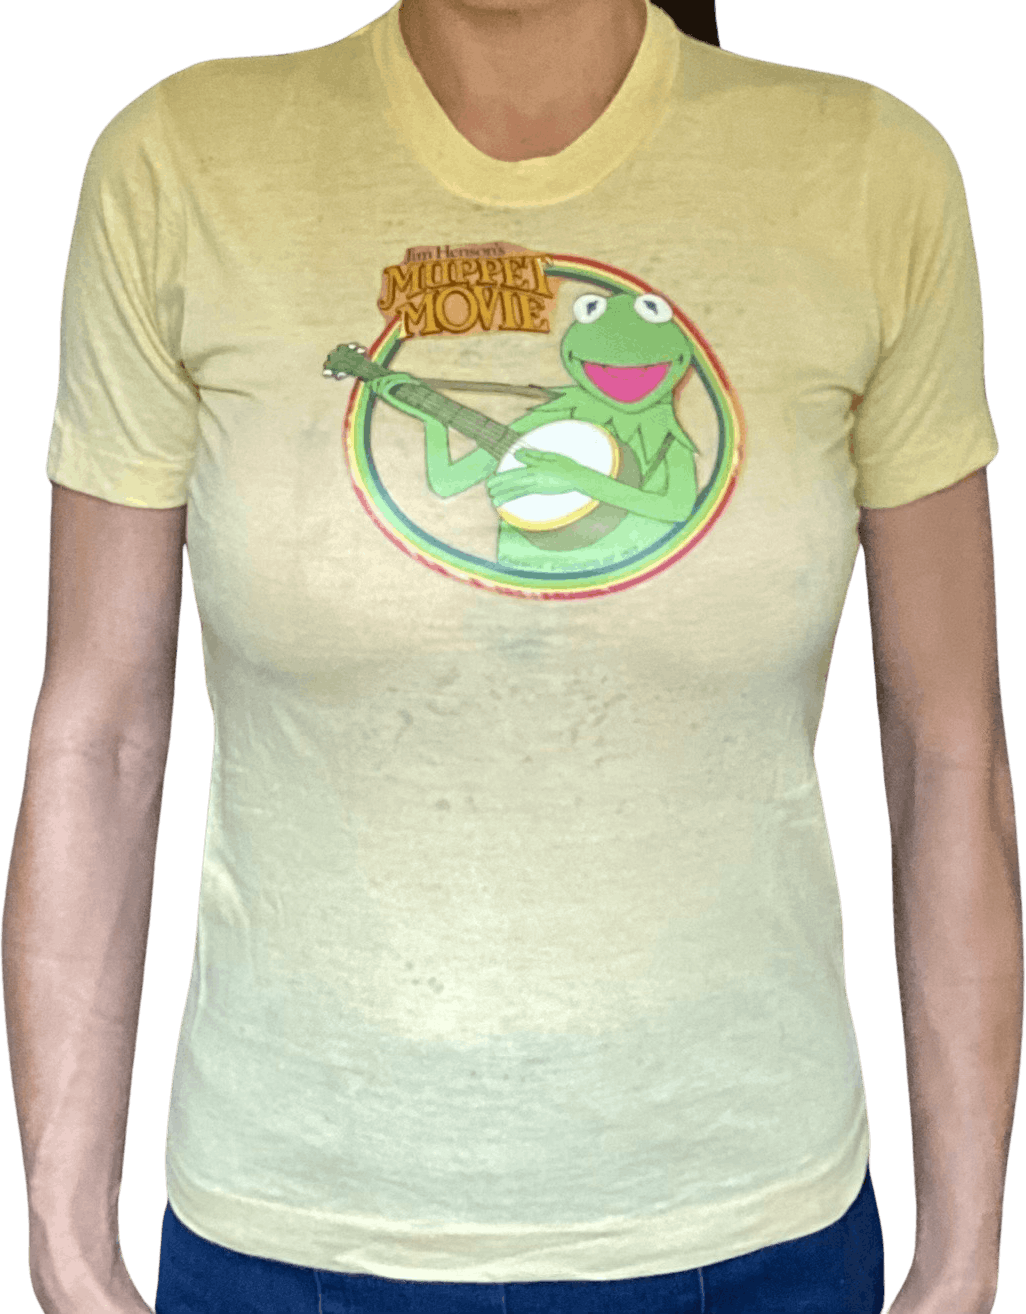 70’s Muppets Movie Iconic Tee Staring Kermit by Muppets